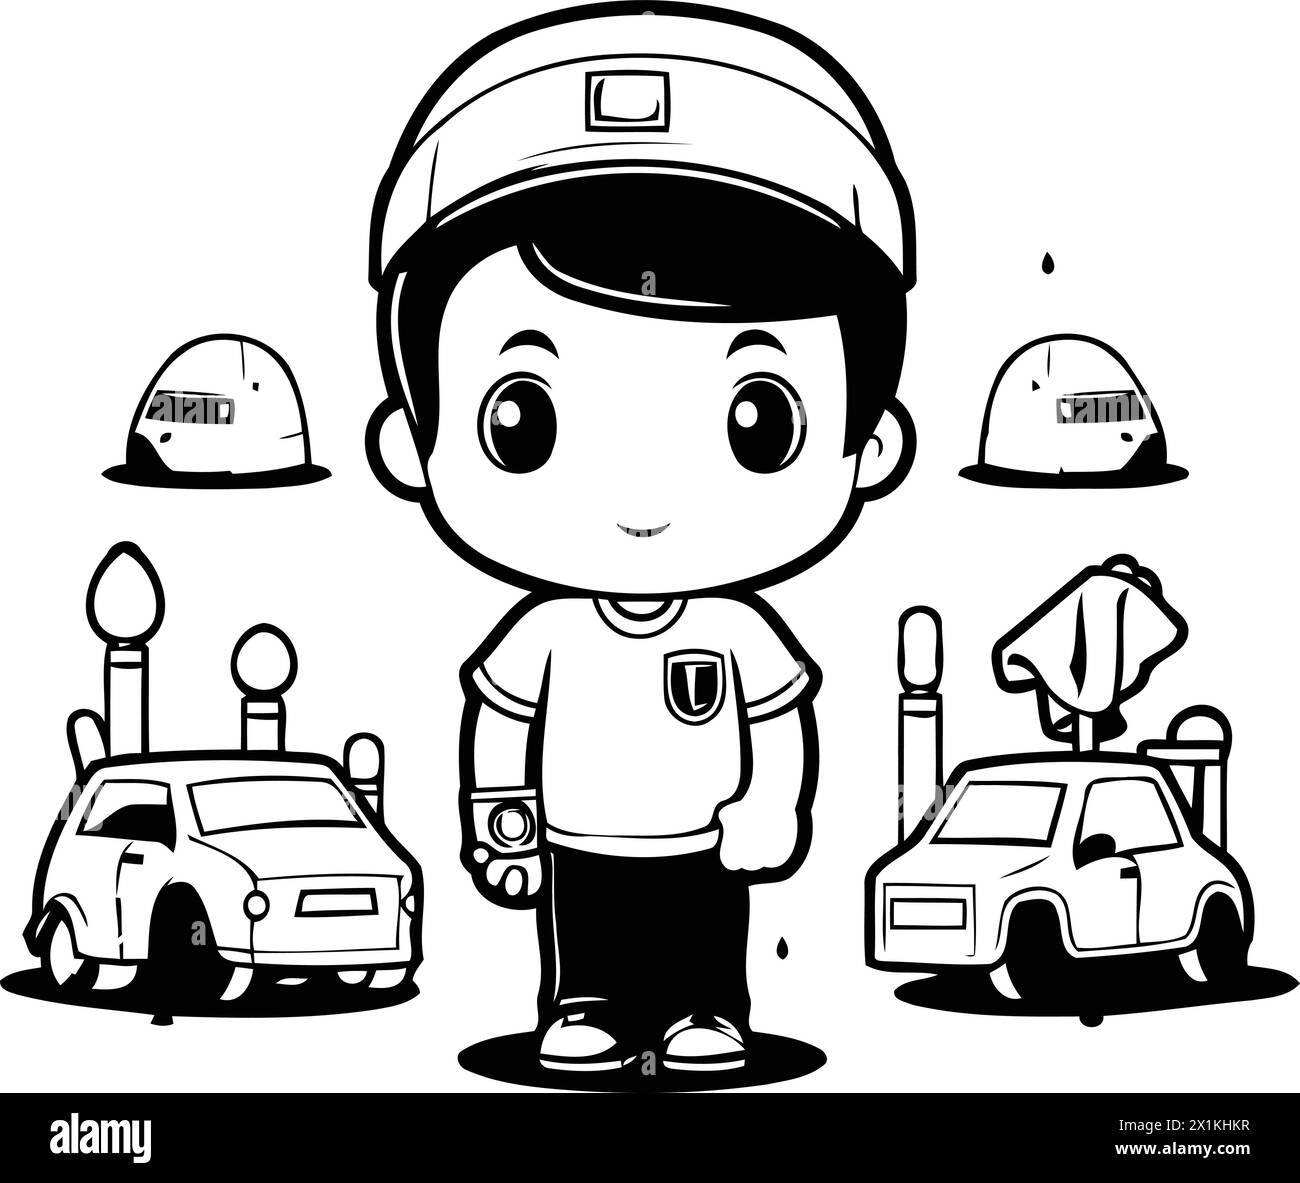 Cartoon boy and cars in the parking lot vector illustration graphic design Stock Vector